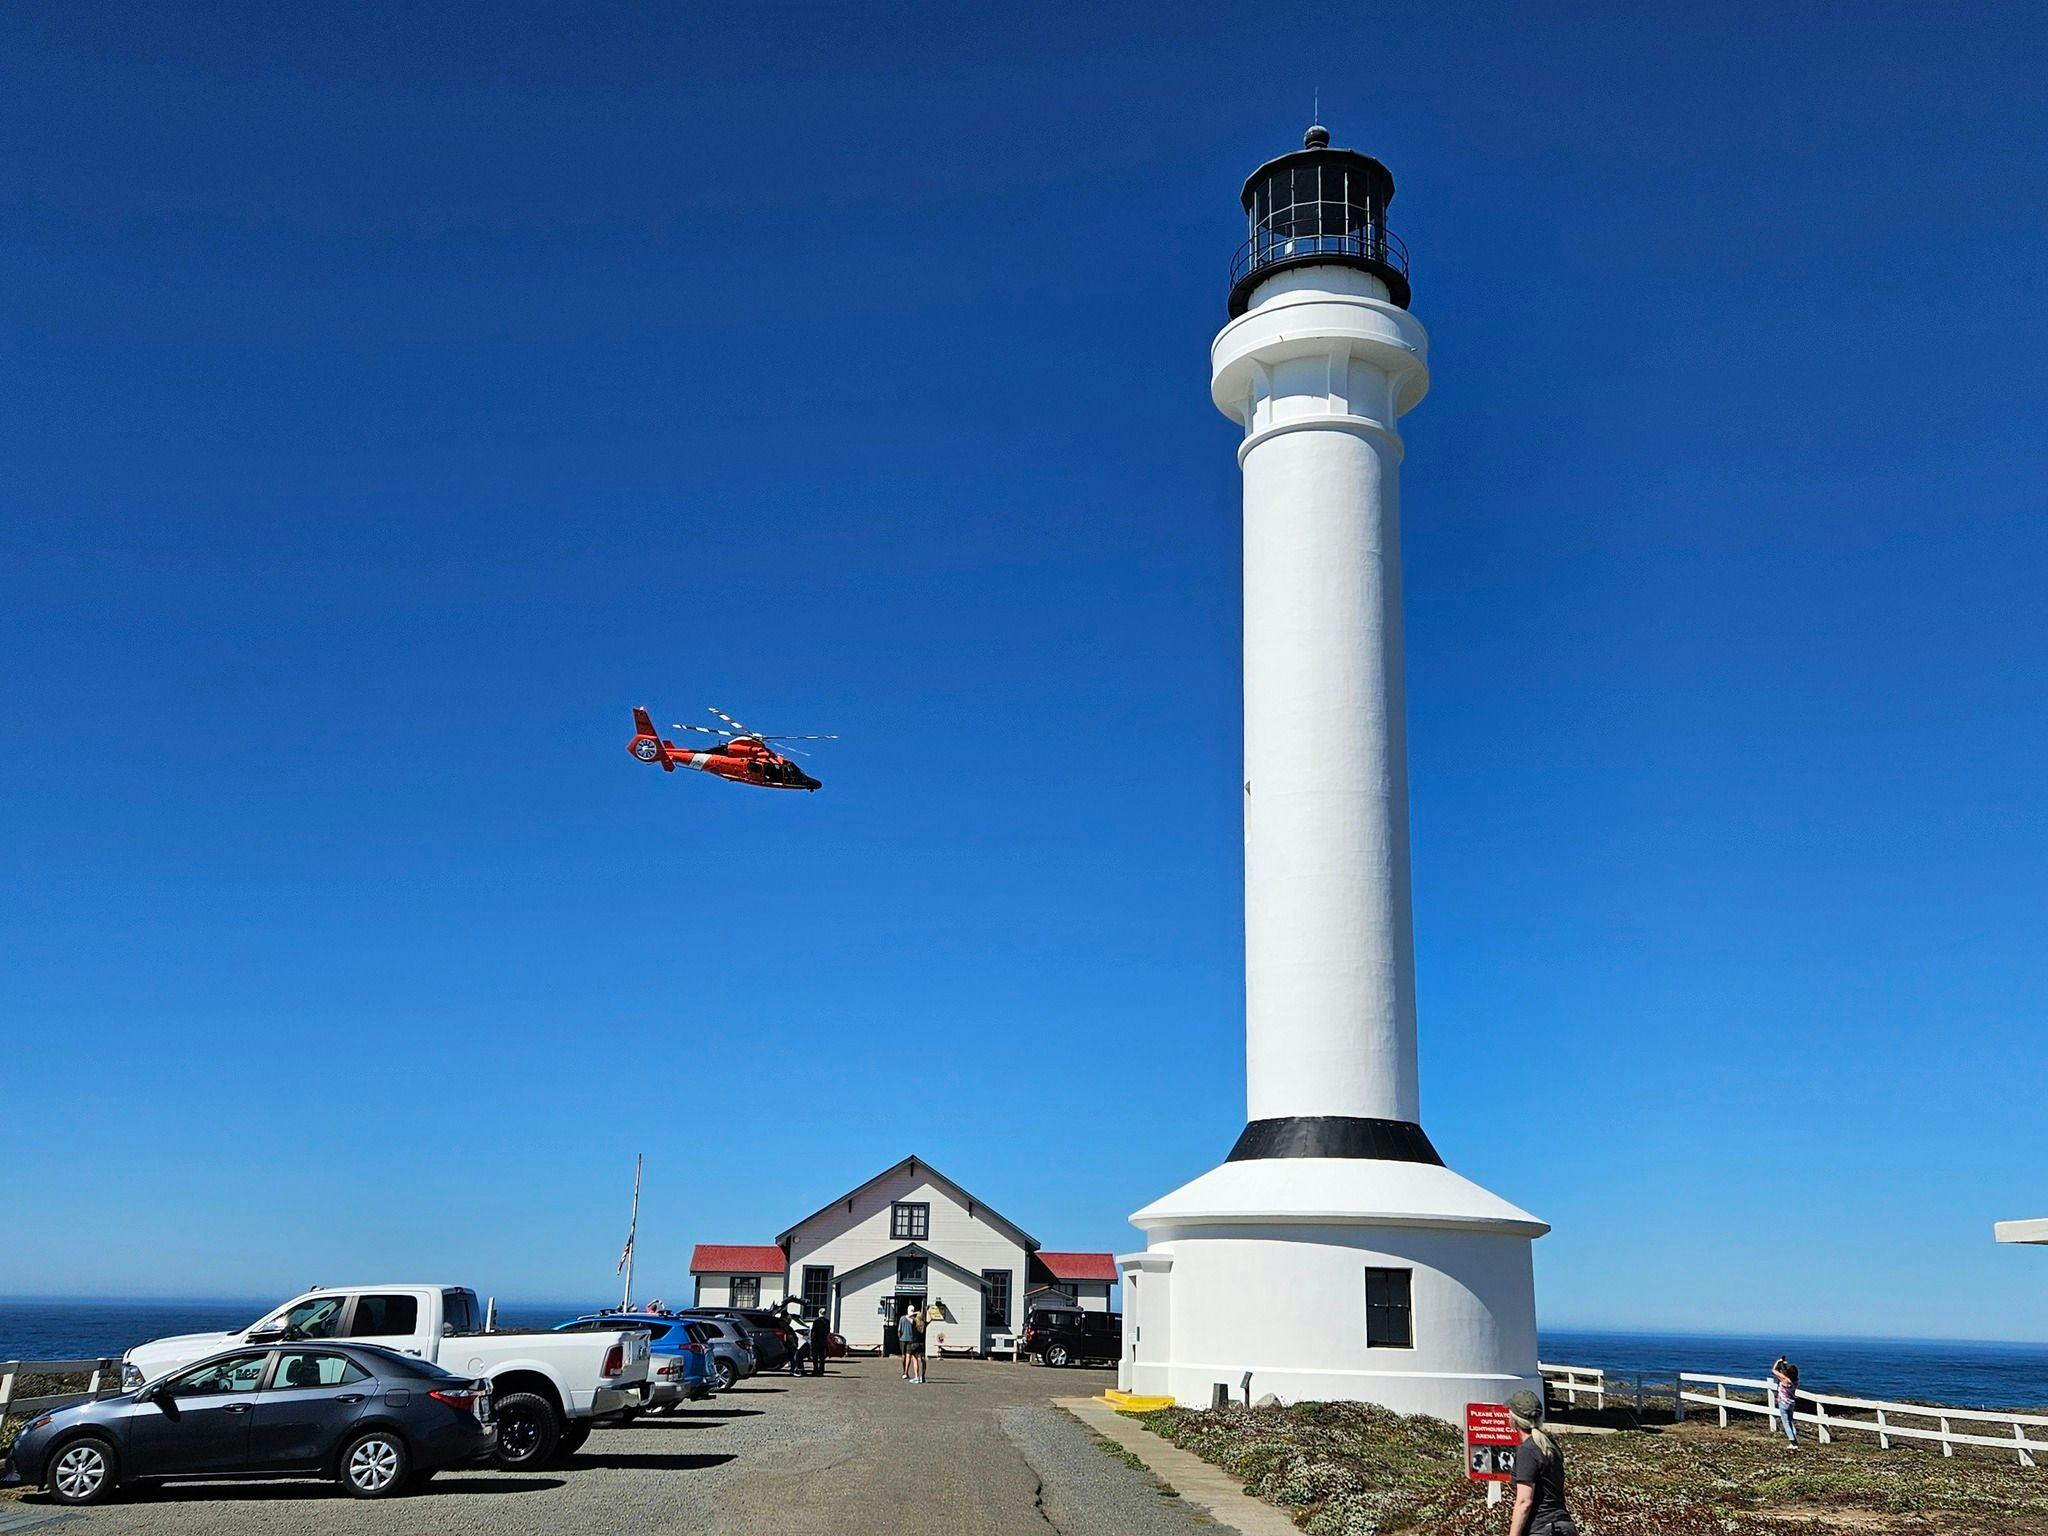 National Lighthouse Day